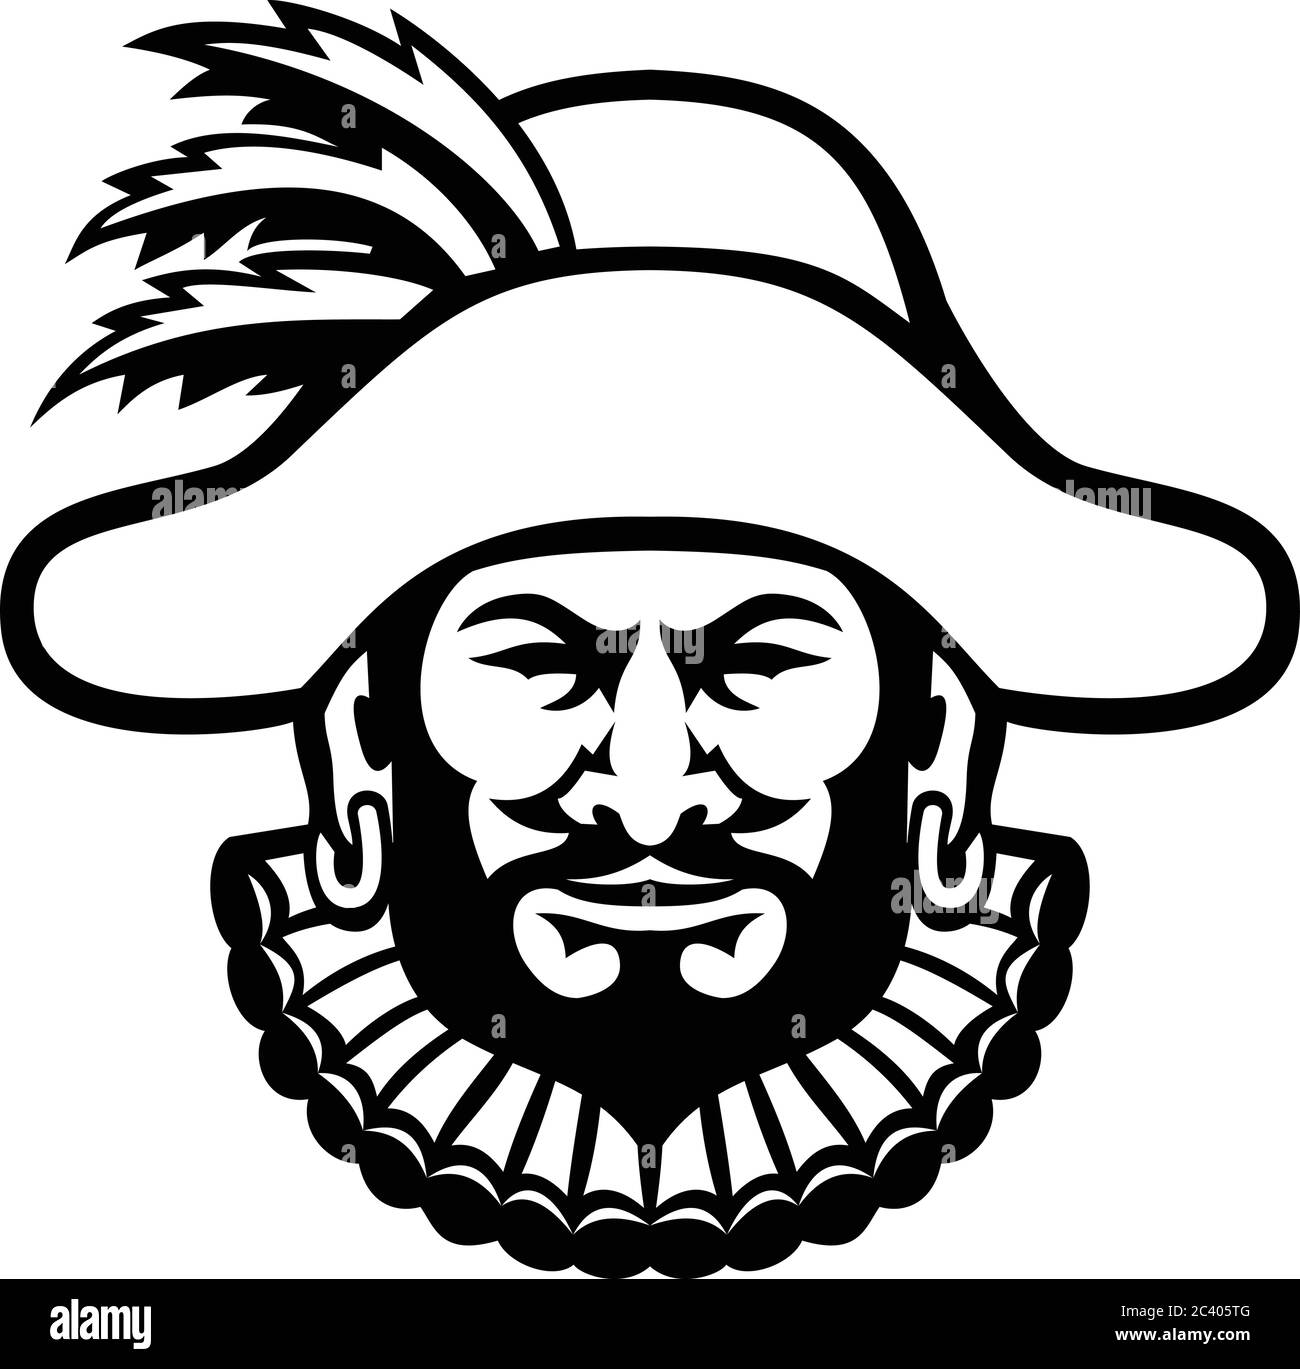 Black and white illustration of head of a minstrel, medieval specialist entertainer, singer or musician wearing a hat with feathers viewed from front Stock Vector